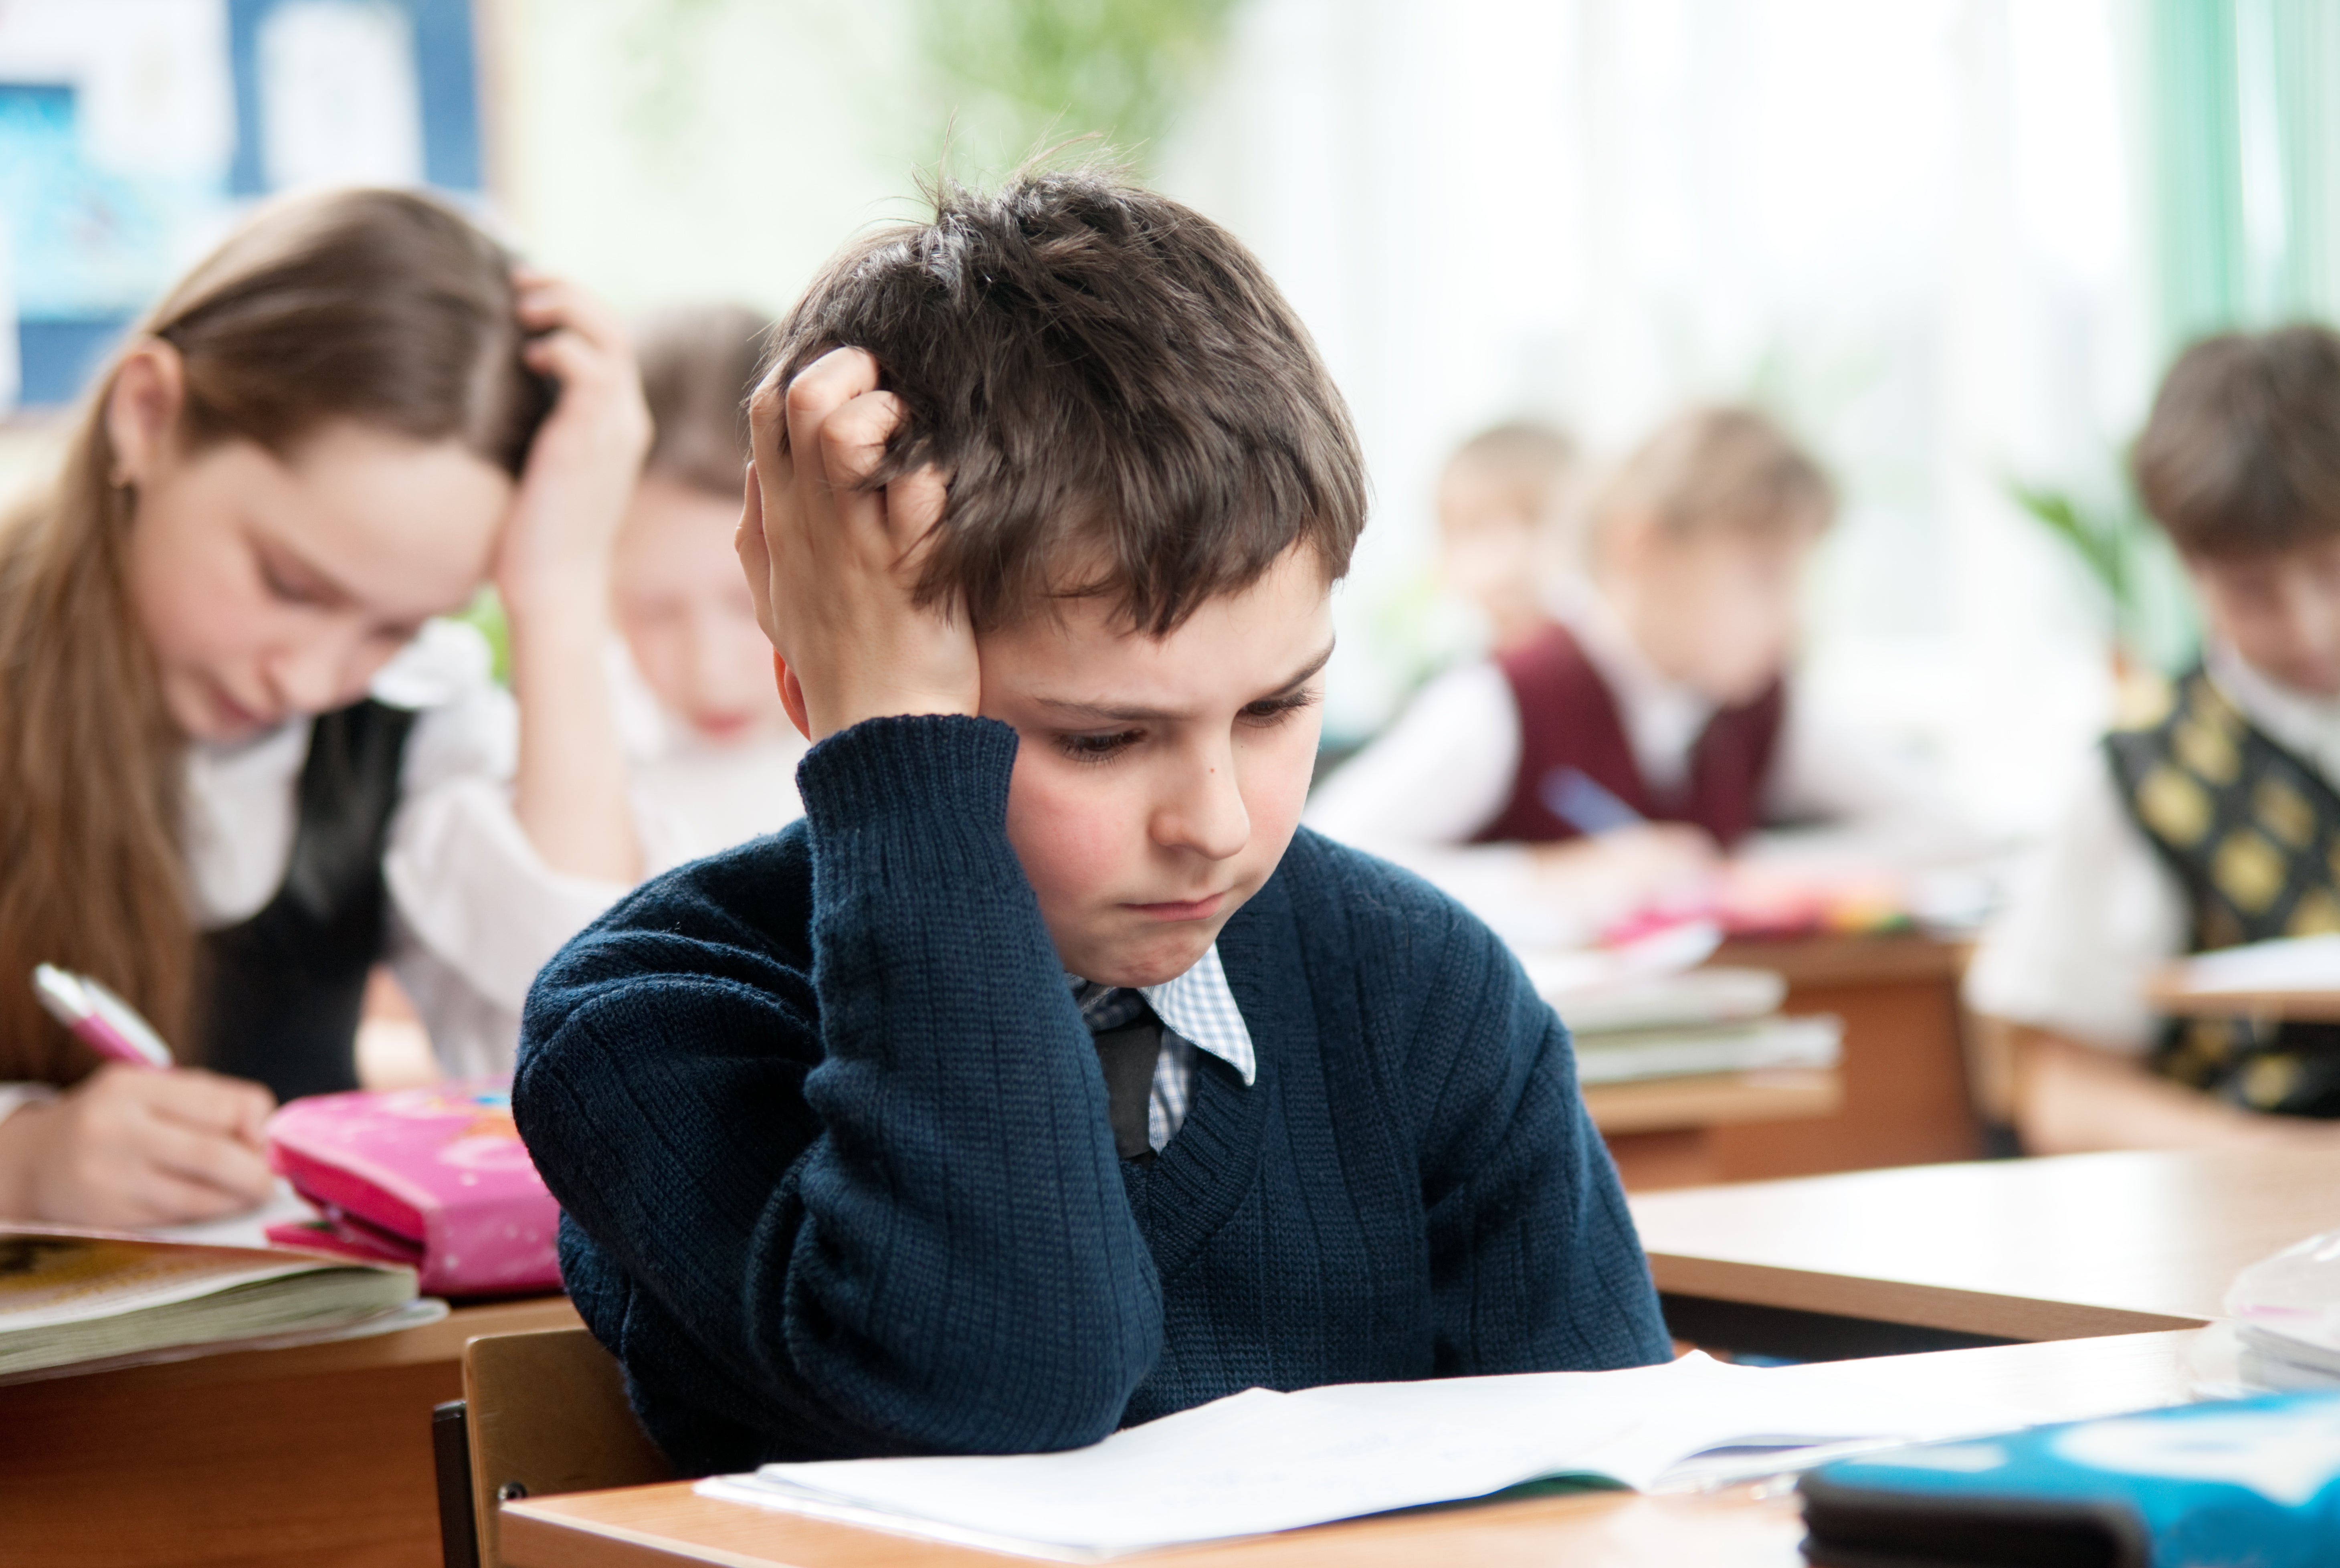 The effect of stress upon our children should not be underestimated